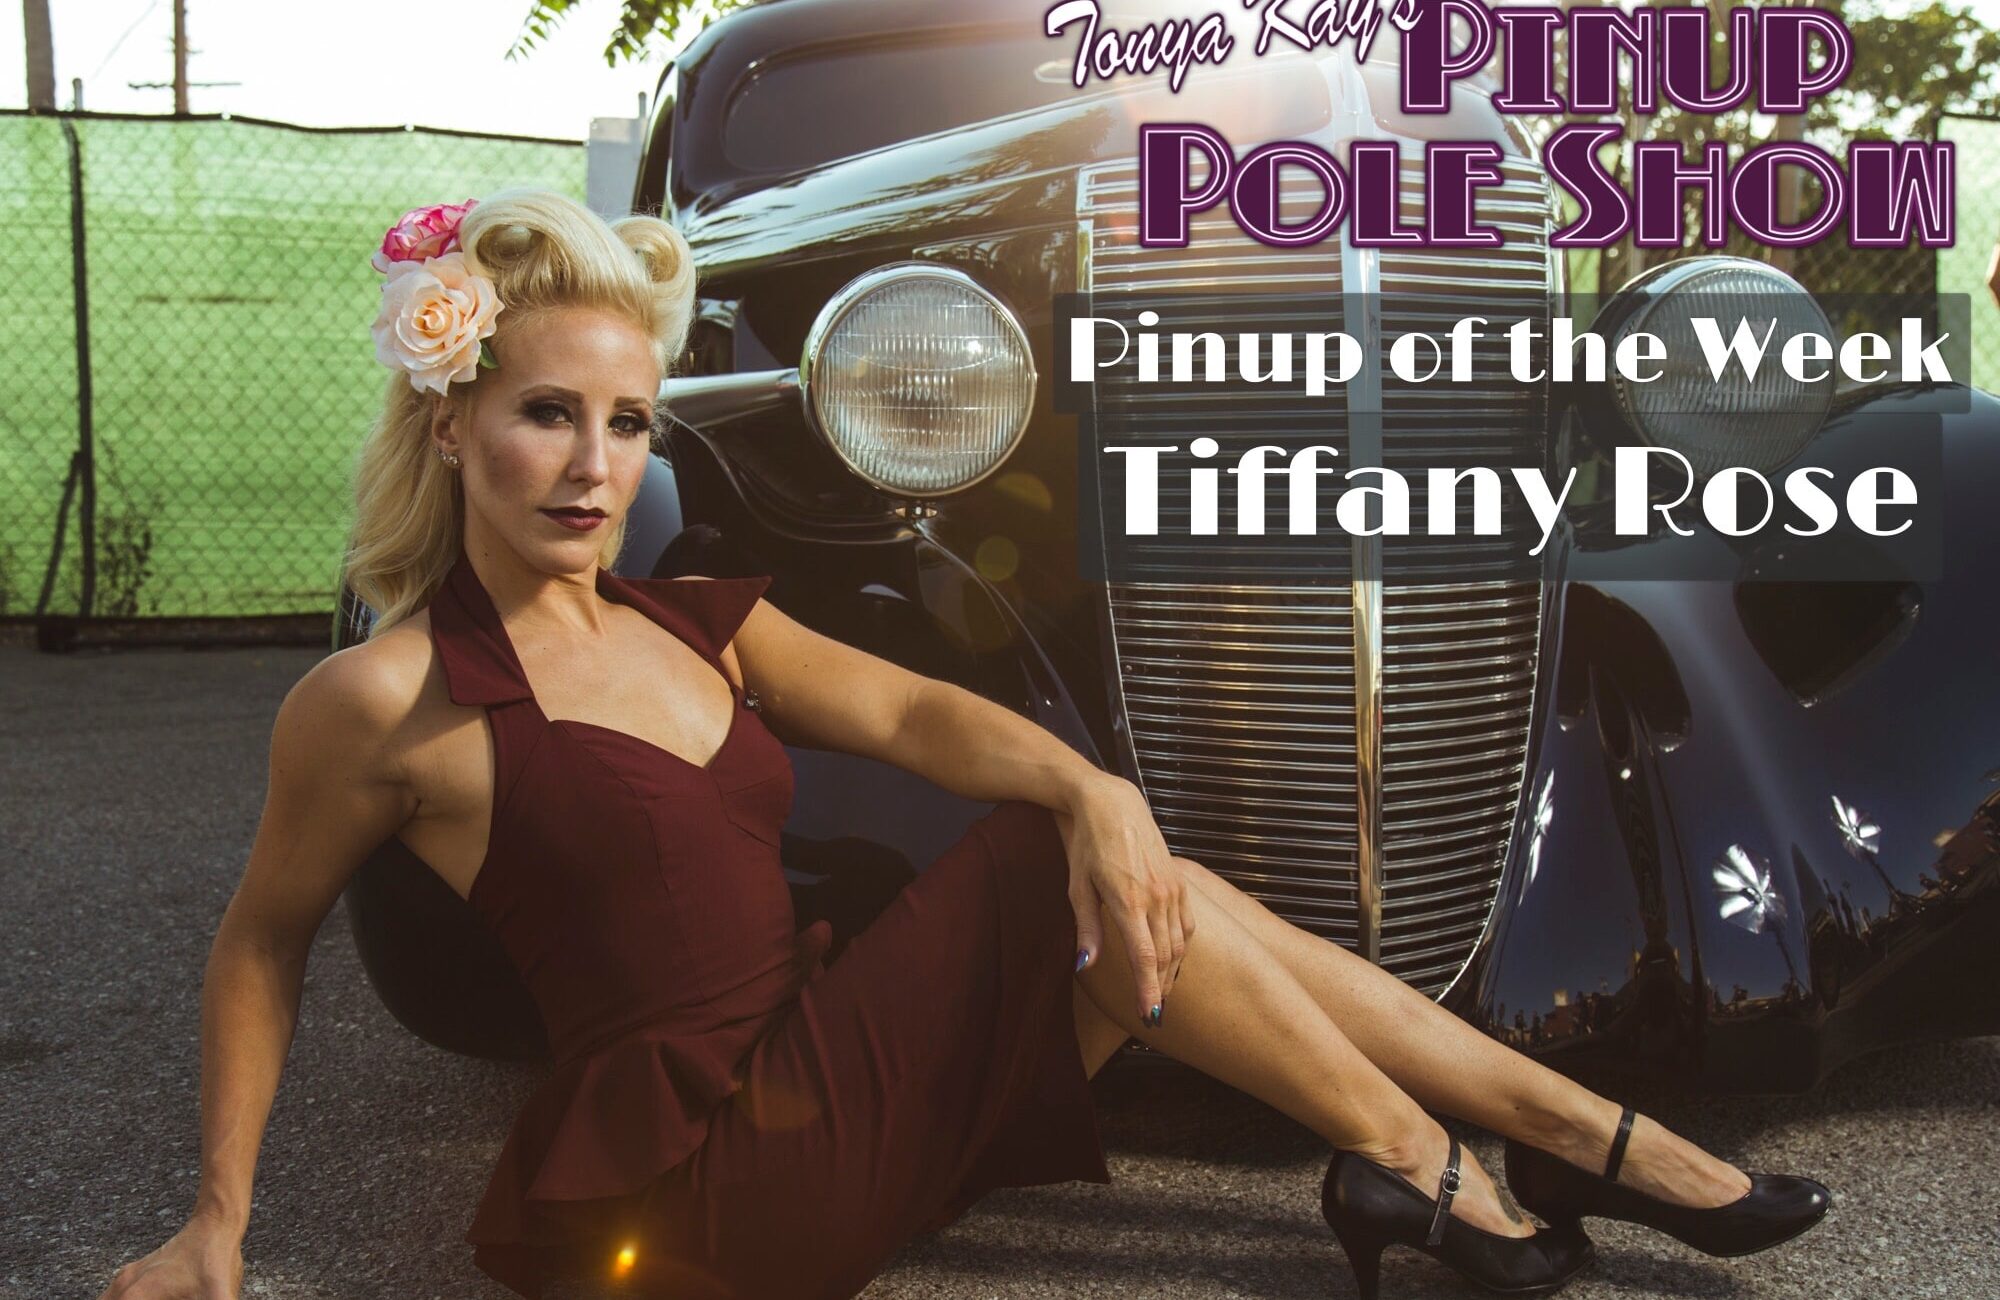 Pinup, Pinup Pole Show